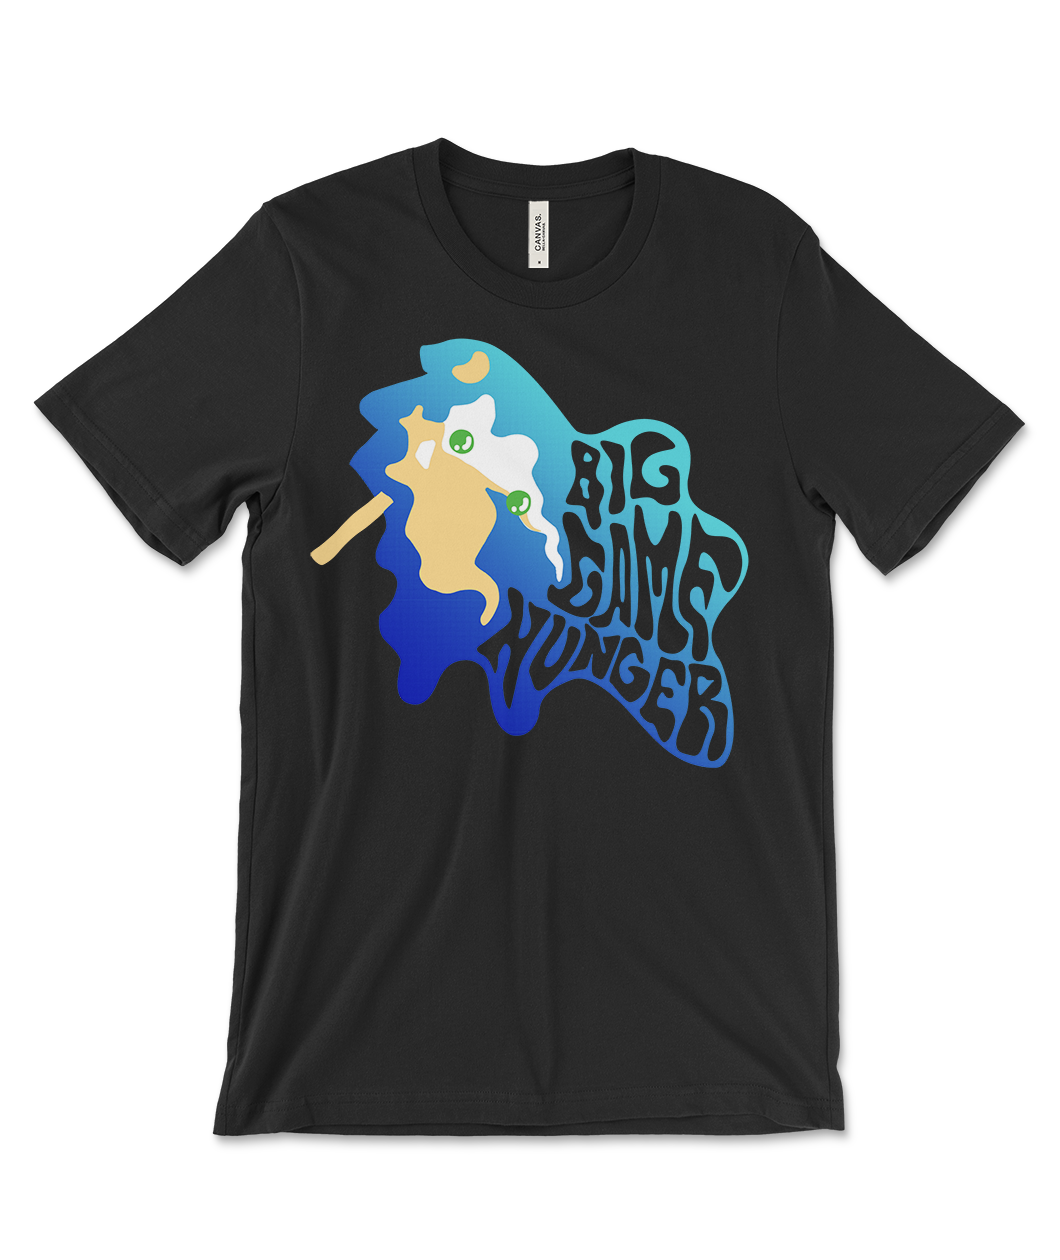 Black t shirt with melted Sonic the Hedgehog popsicle head dripping with text 